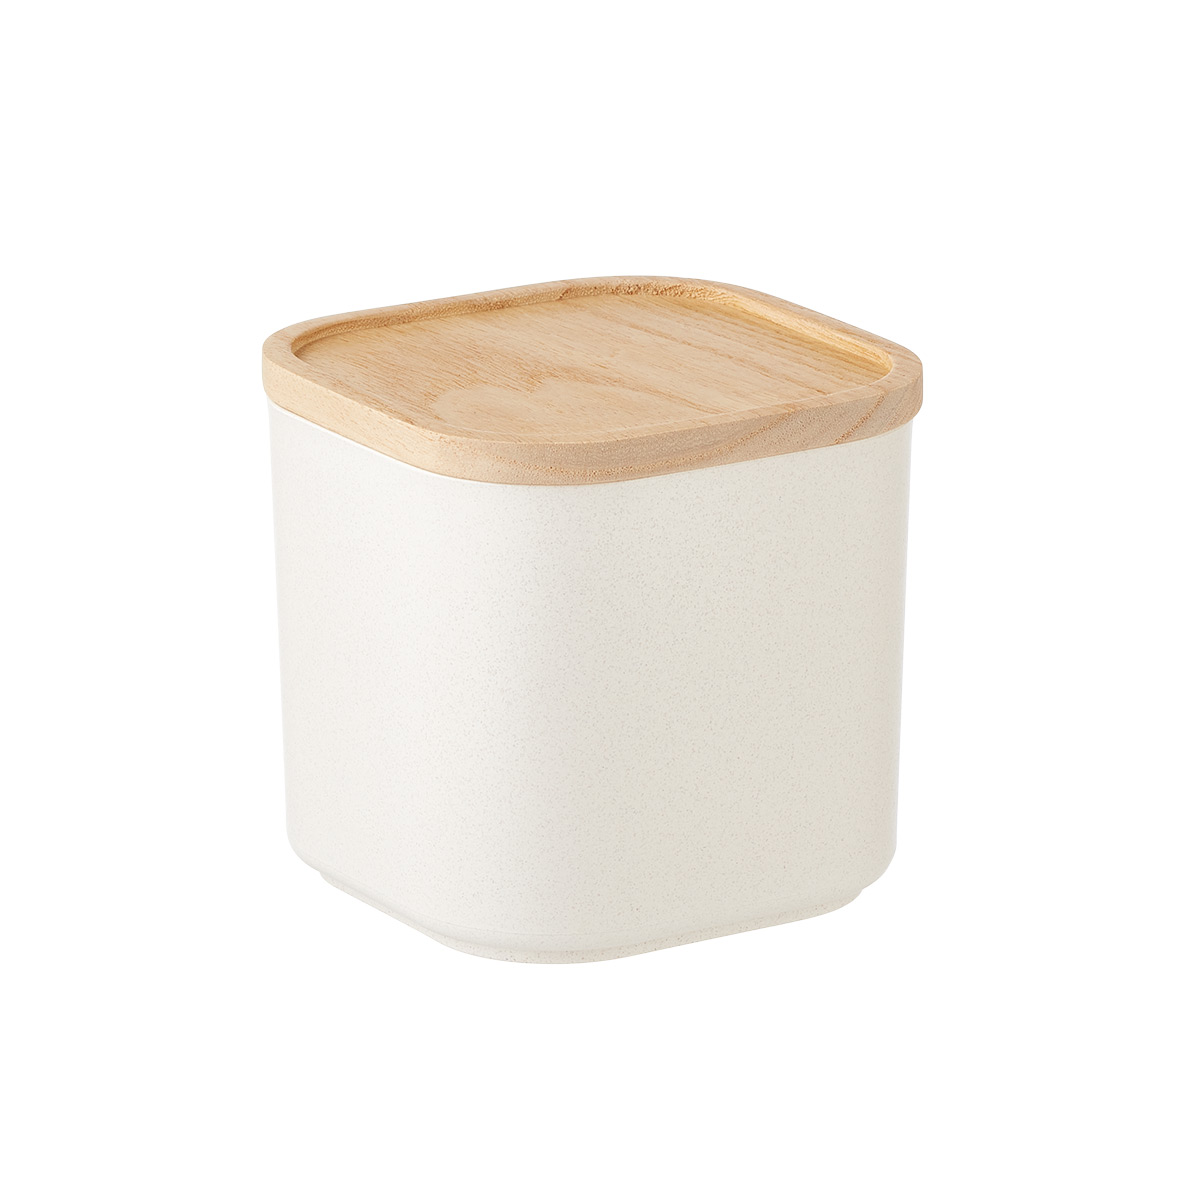 https://www.containerstore.com/catalogimages/451634/10088739_3_Cup_RO_Eco-Friendly_Canis.jpg